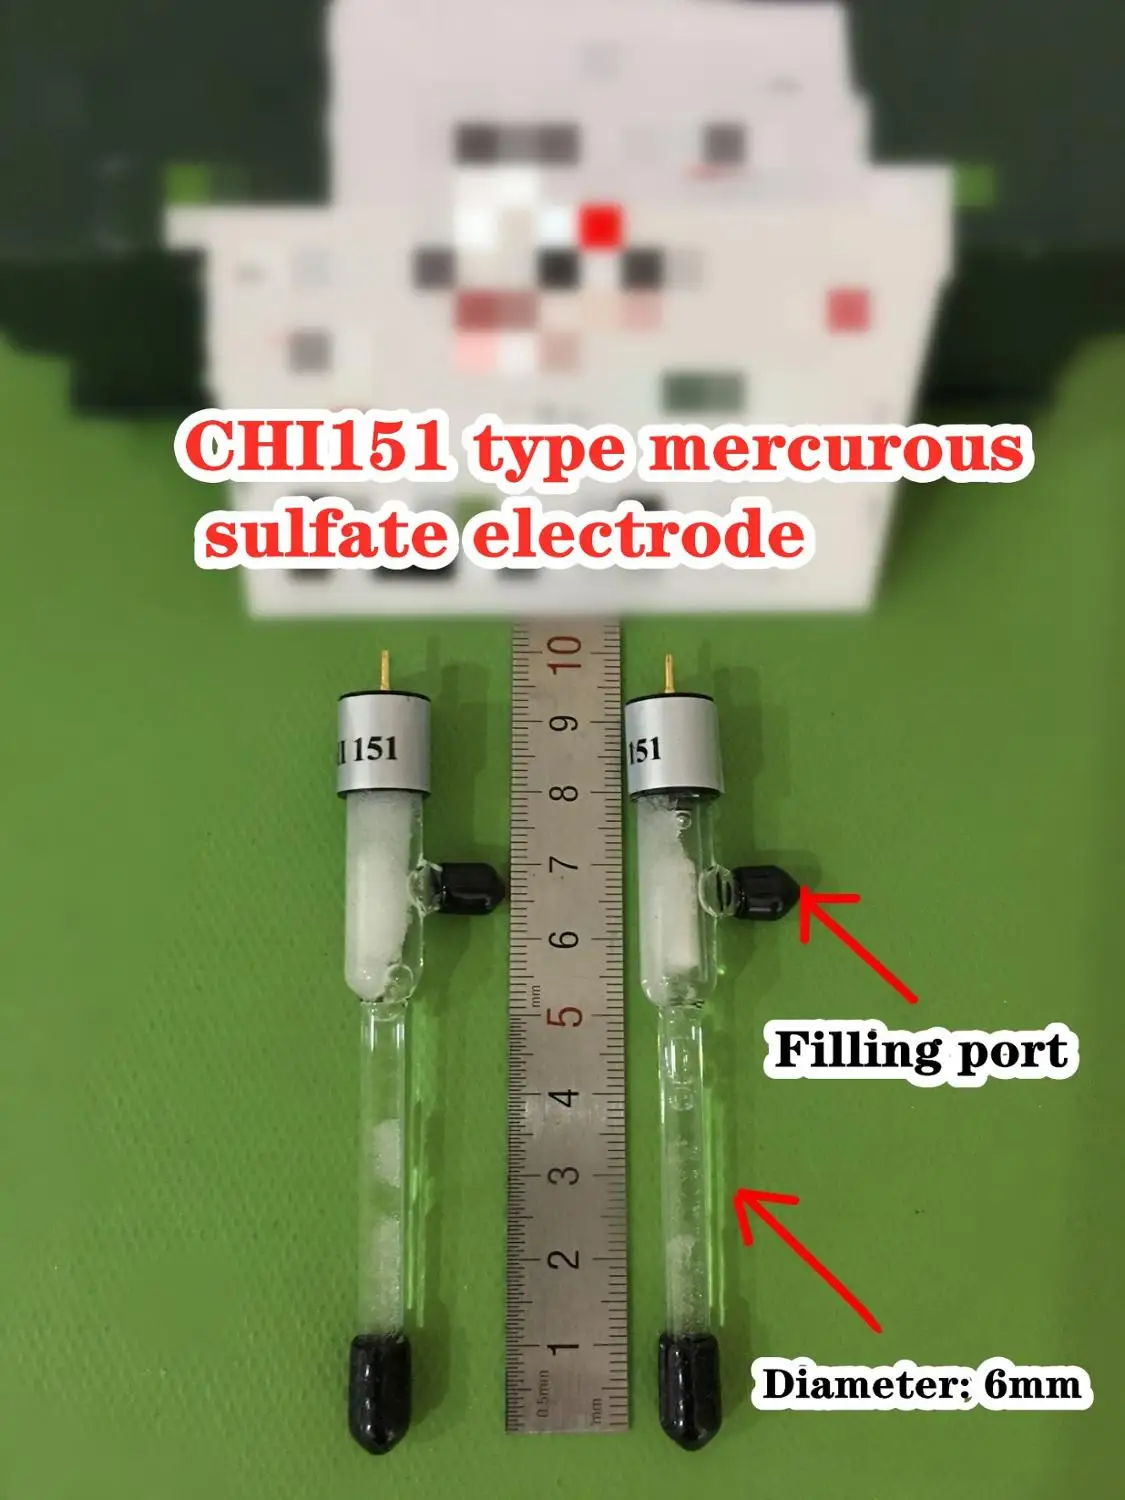 

Shanghai Chenhua CHI150 saturated calomel electrode CHI151 mercury / mercurous sulfate reference electrode